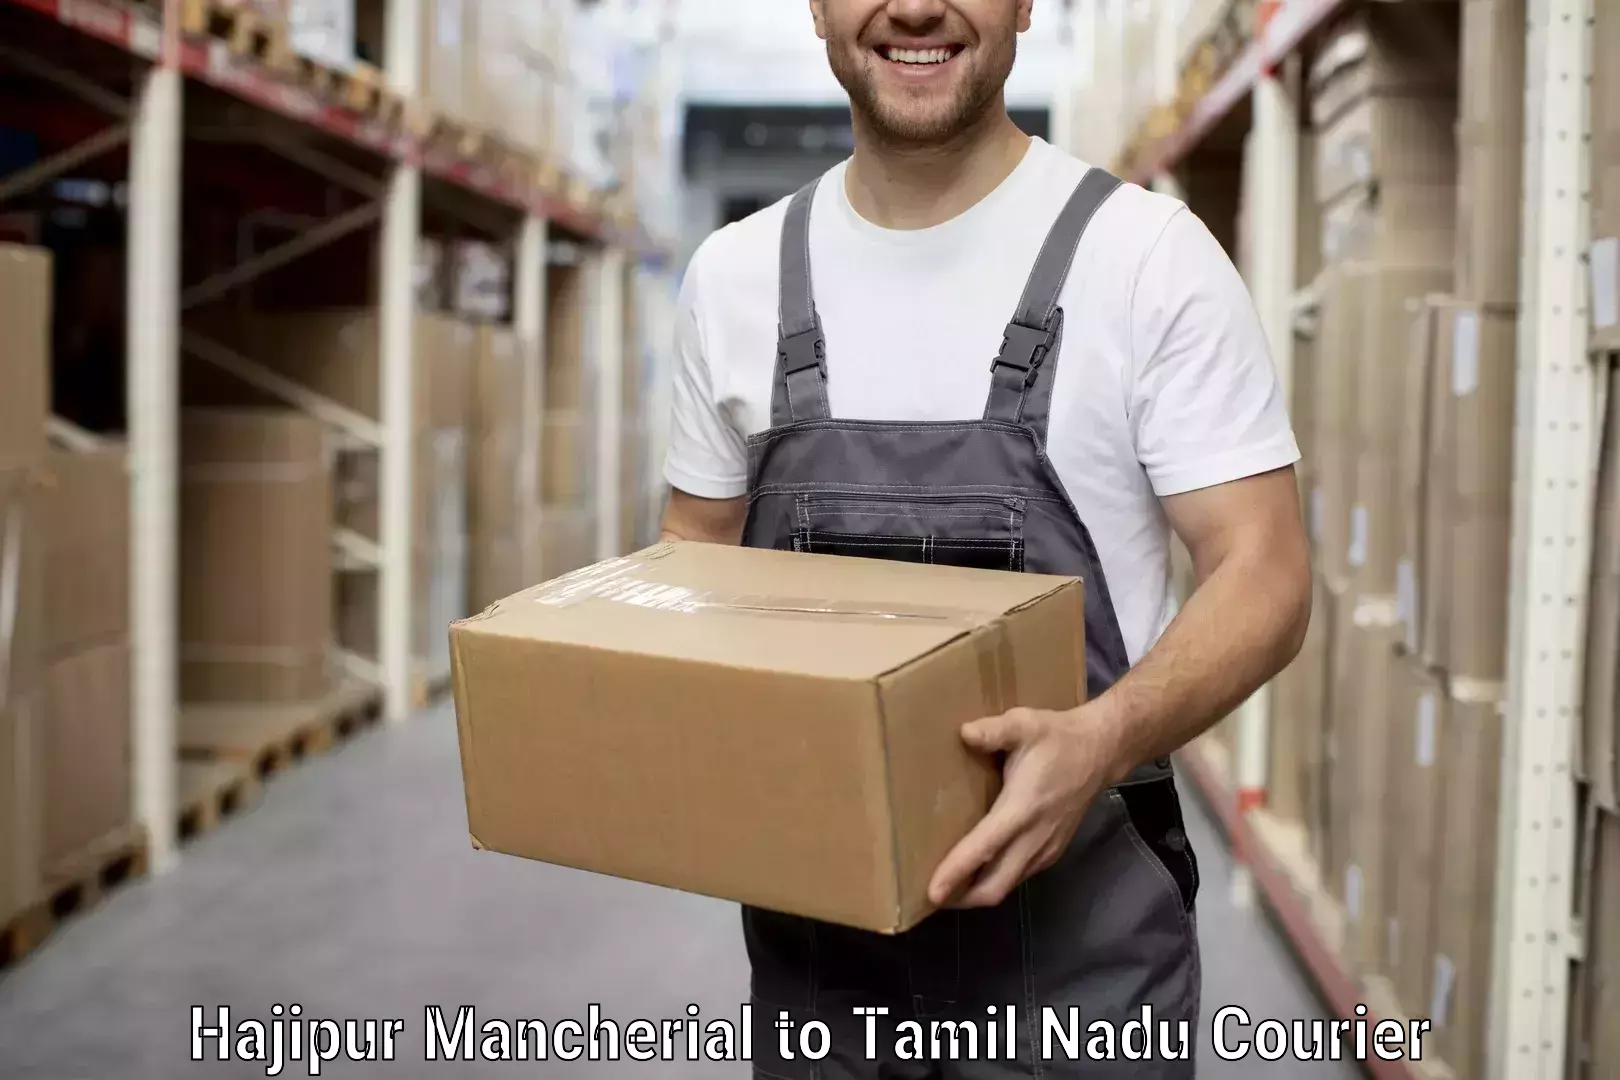 High-quality moving services Hajipur Mancherial to Ambur